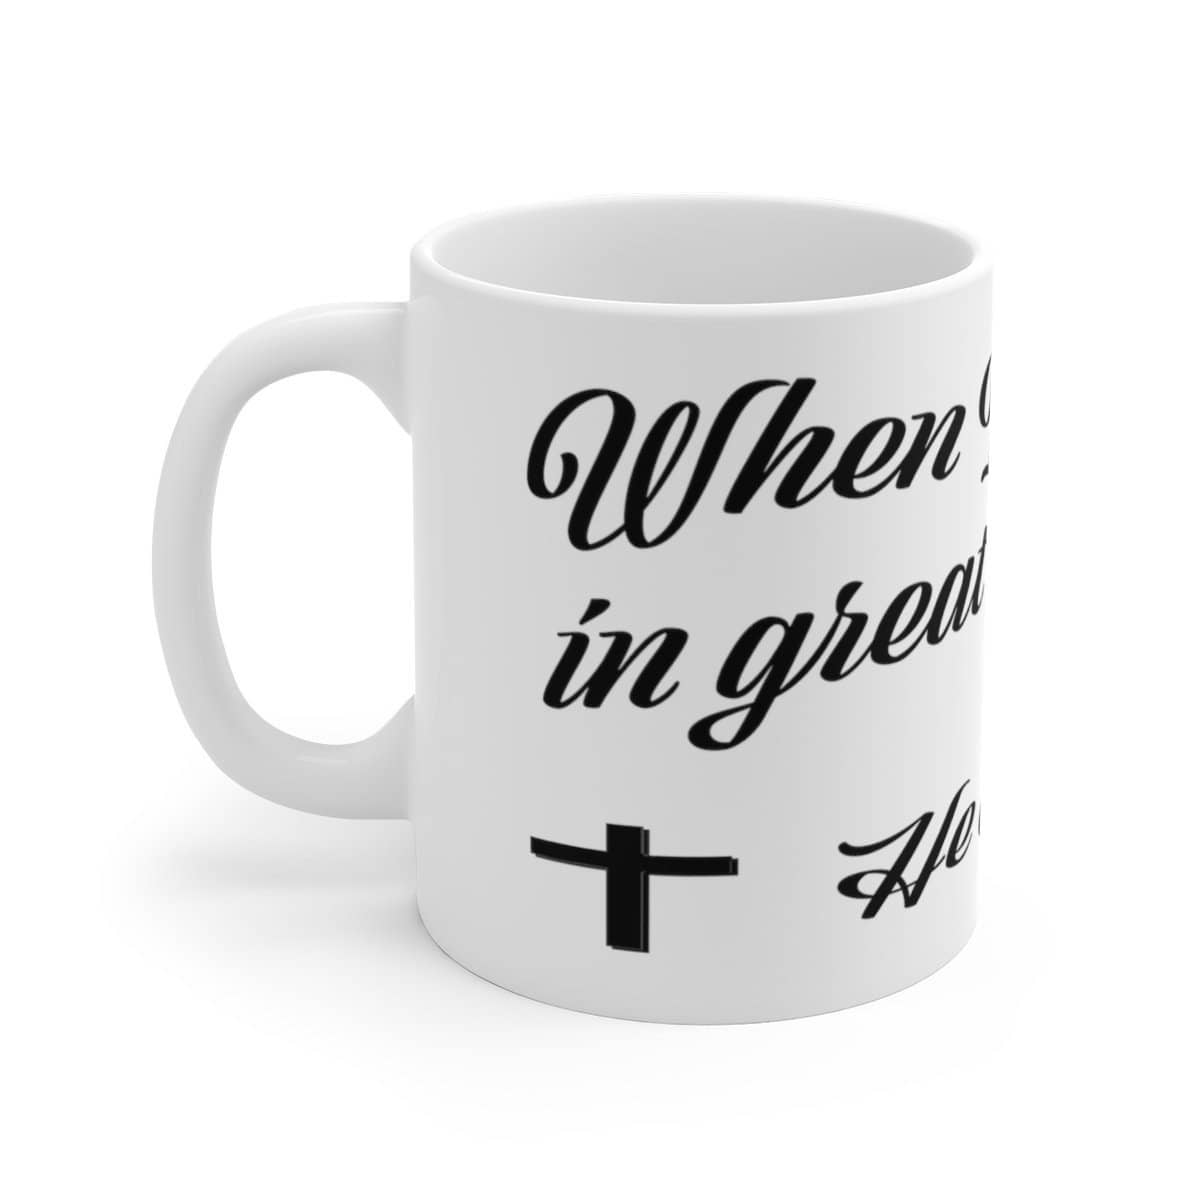 White Ceramic Mug "When I was in Great Need" in 11 oz or 15 oz (3556853350500)